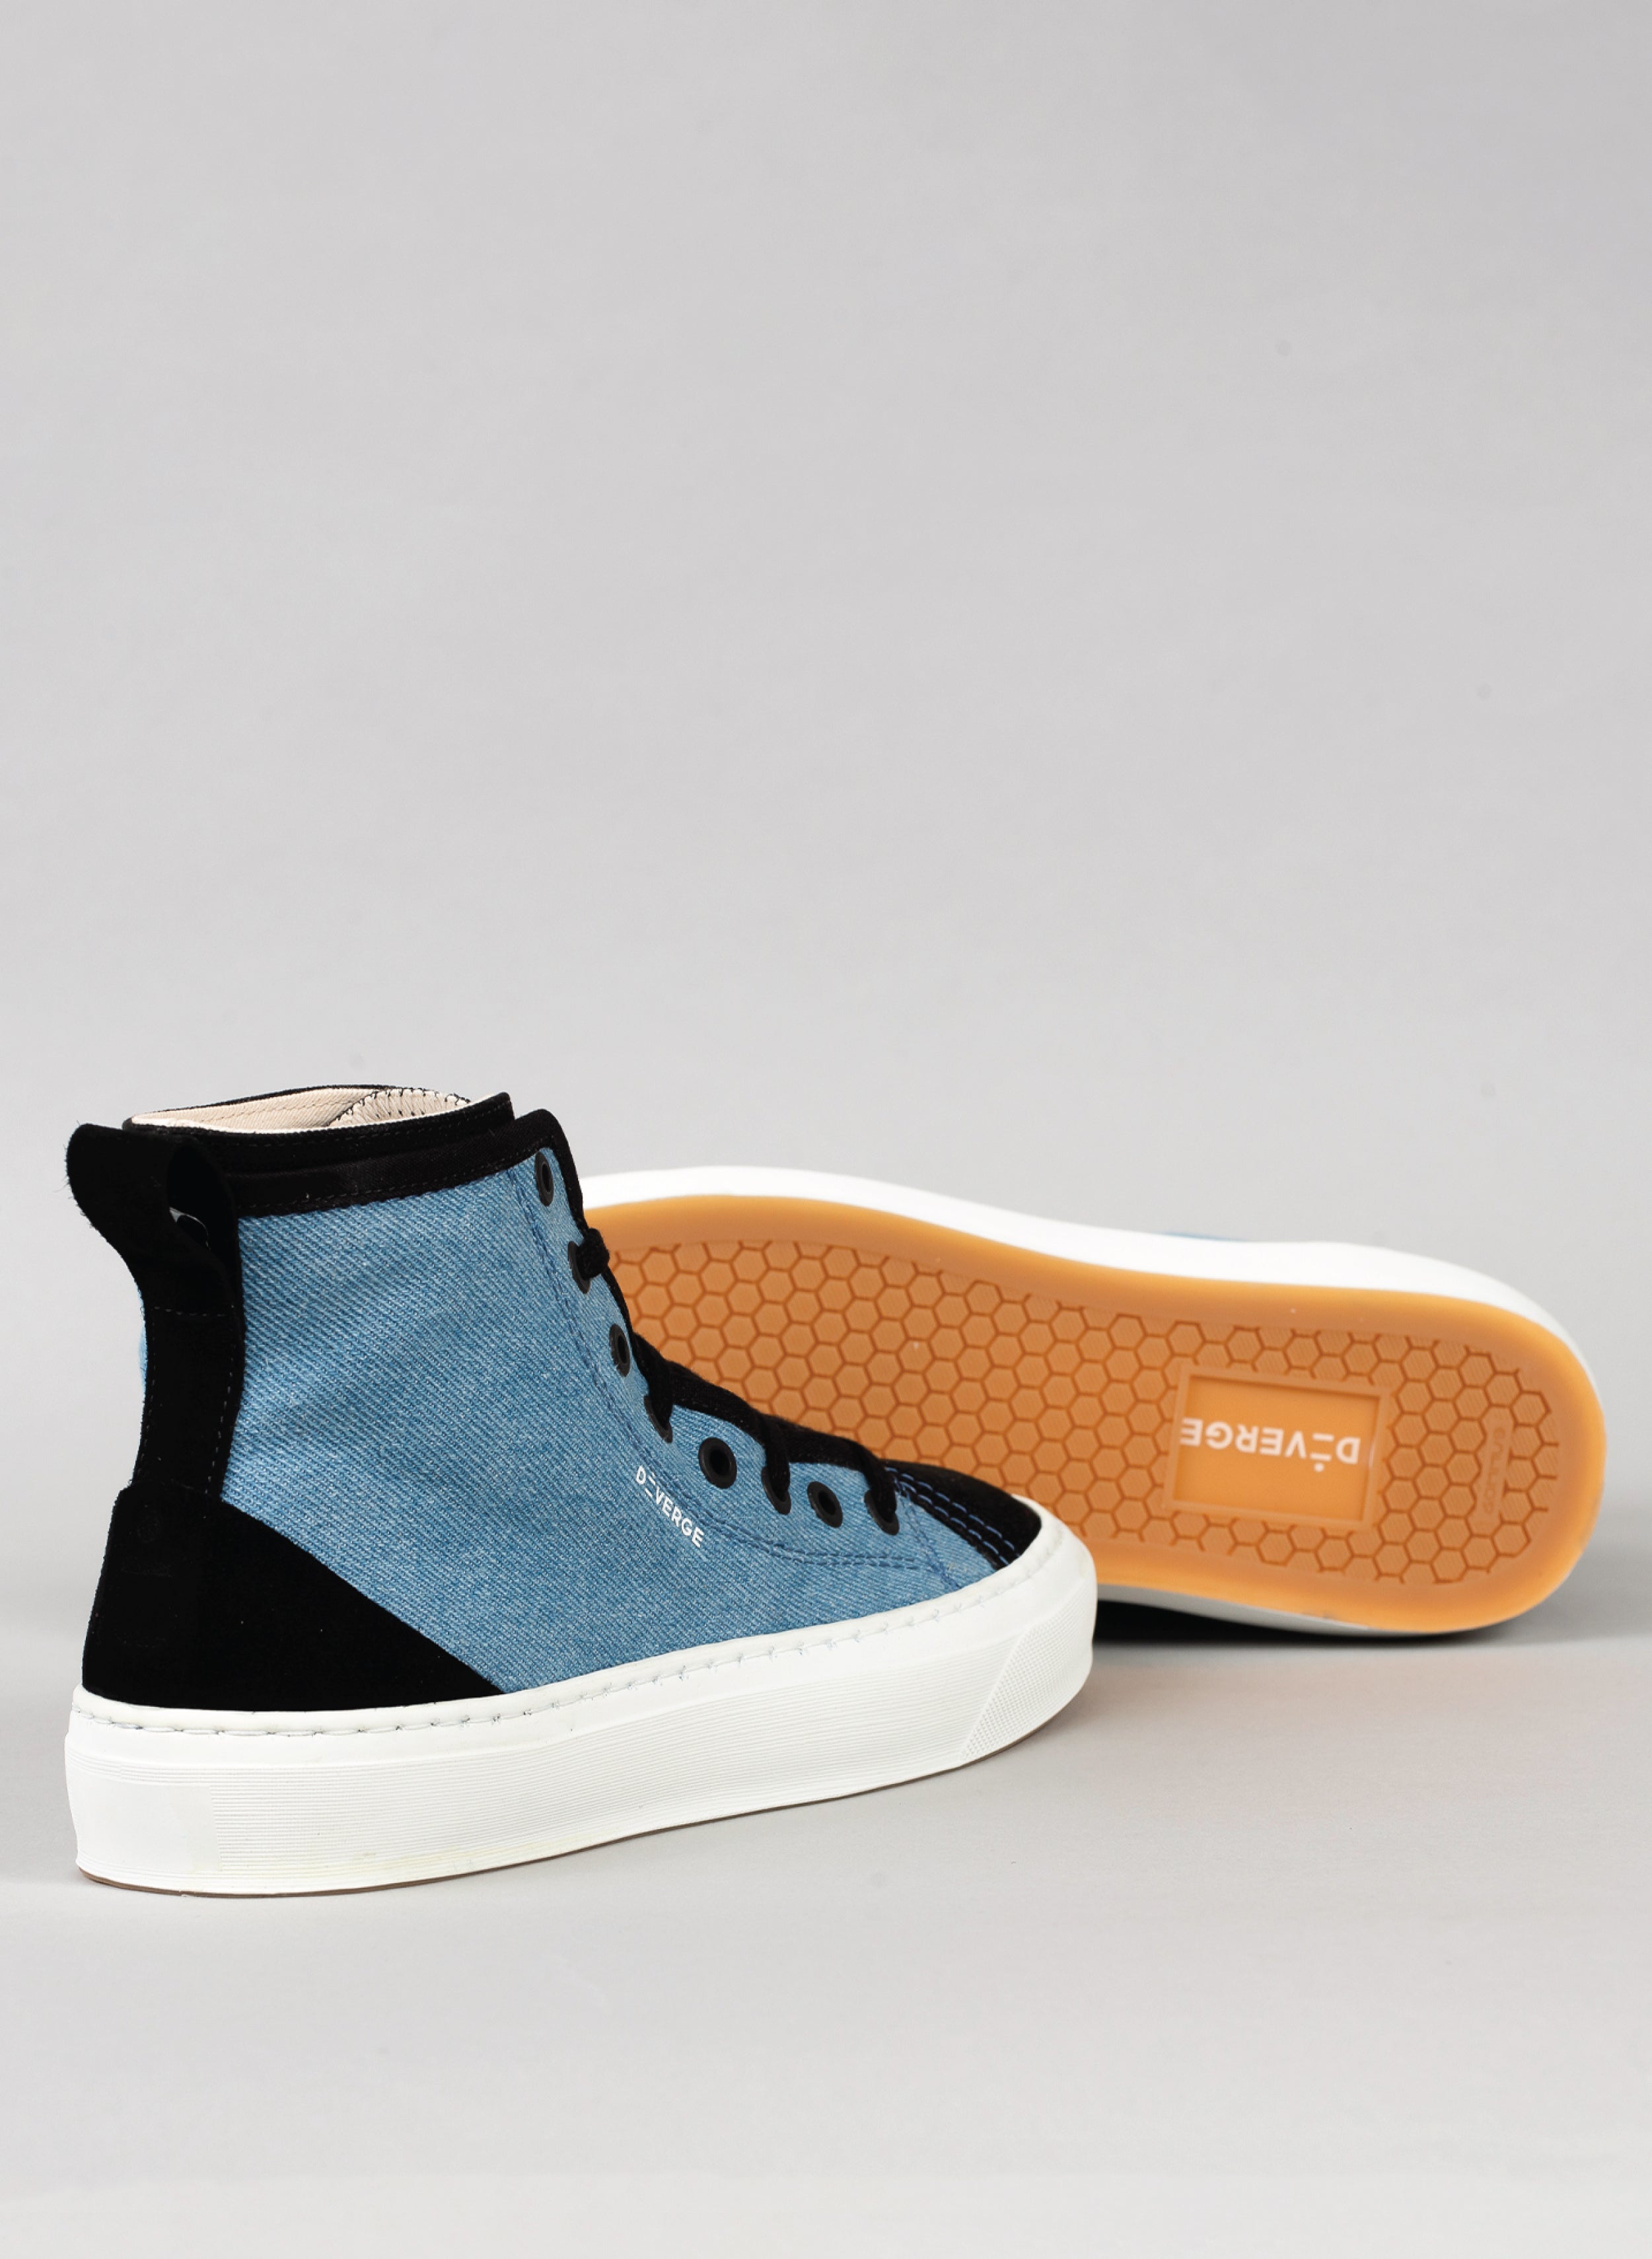 Black and denim high top sneakers with white sole by Diverge, promoting social impact and custom shoes.